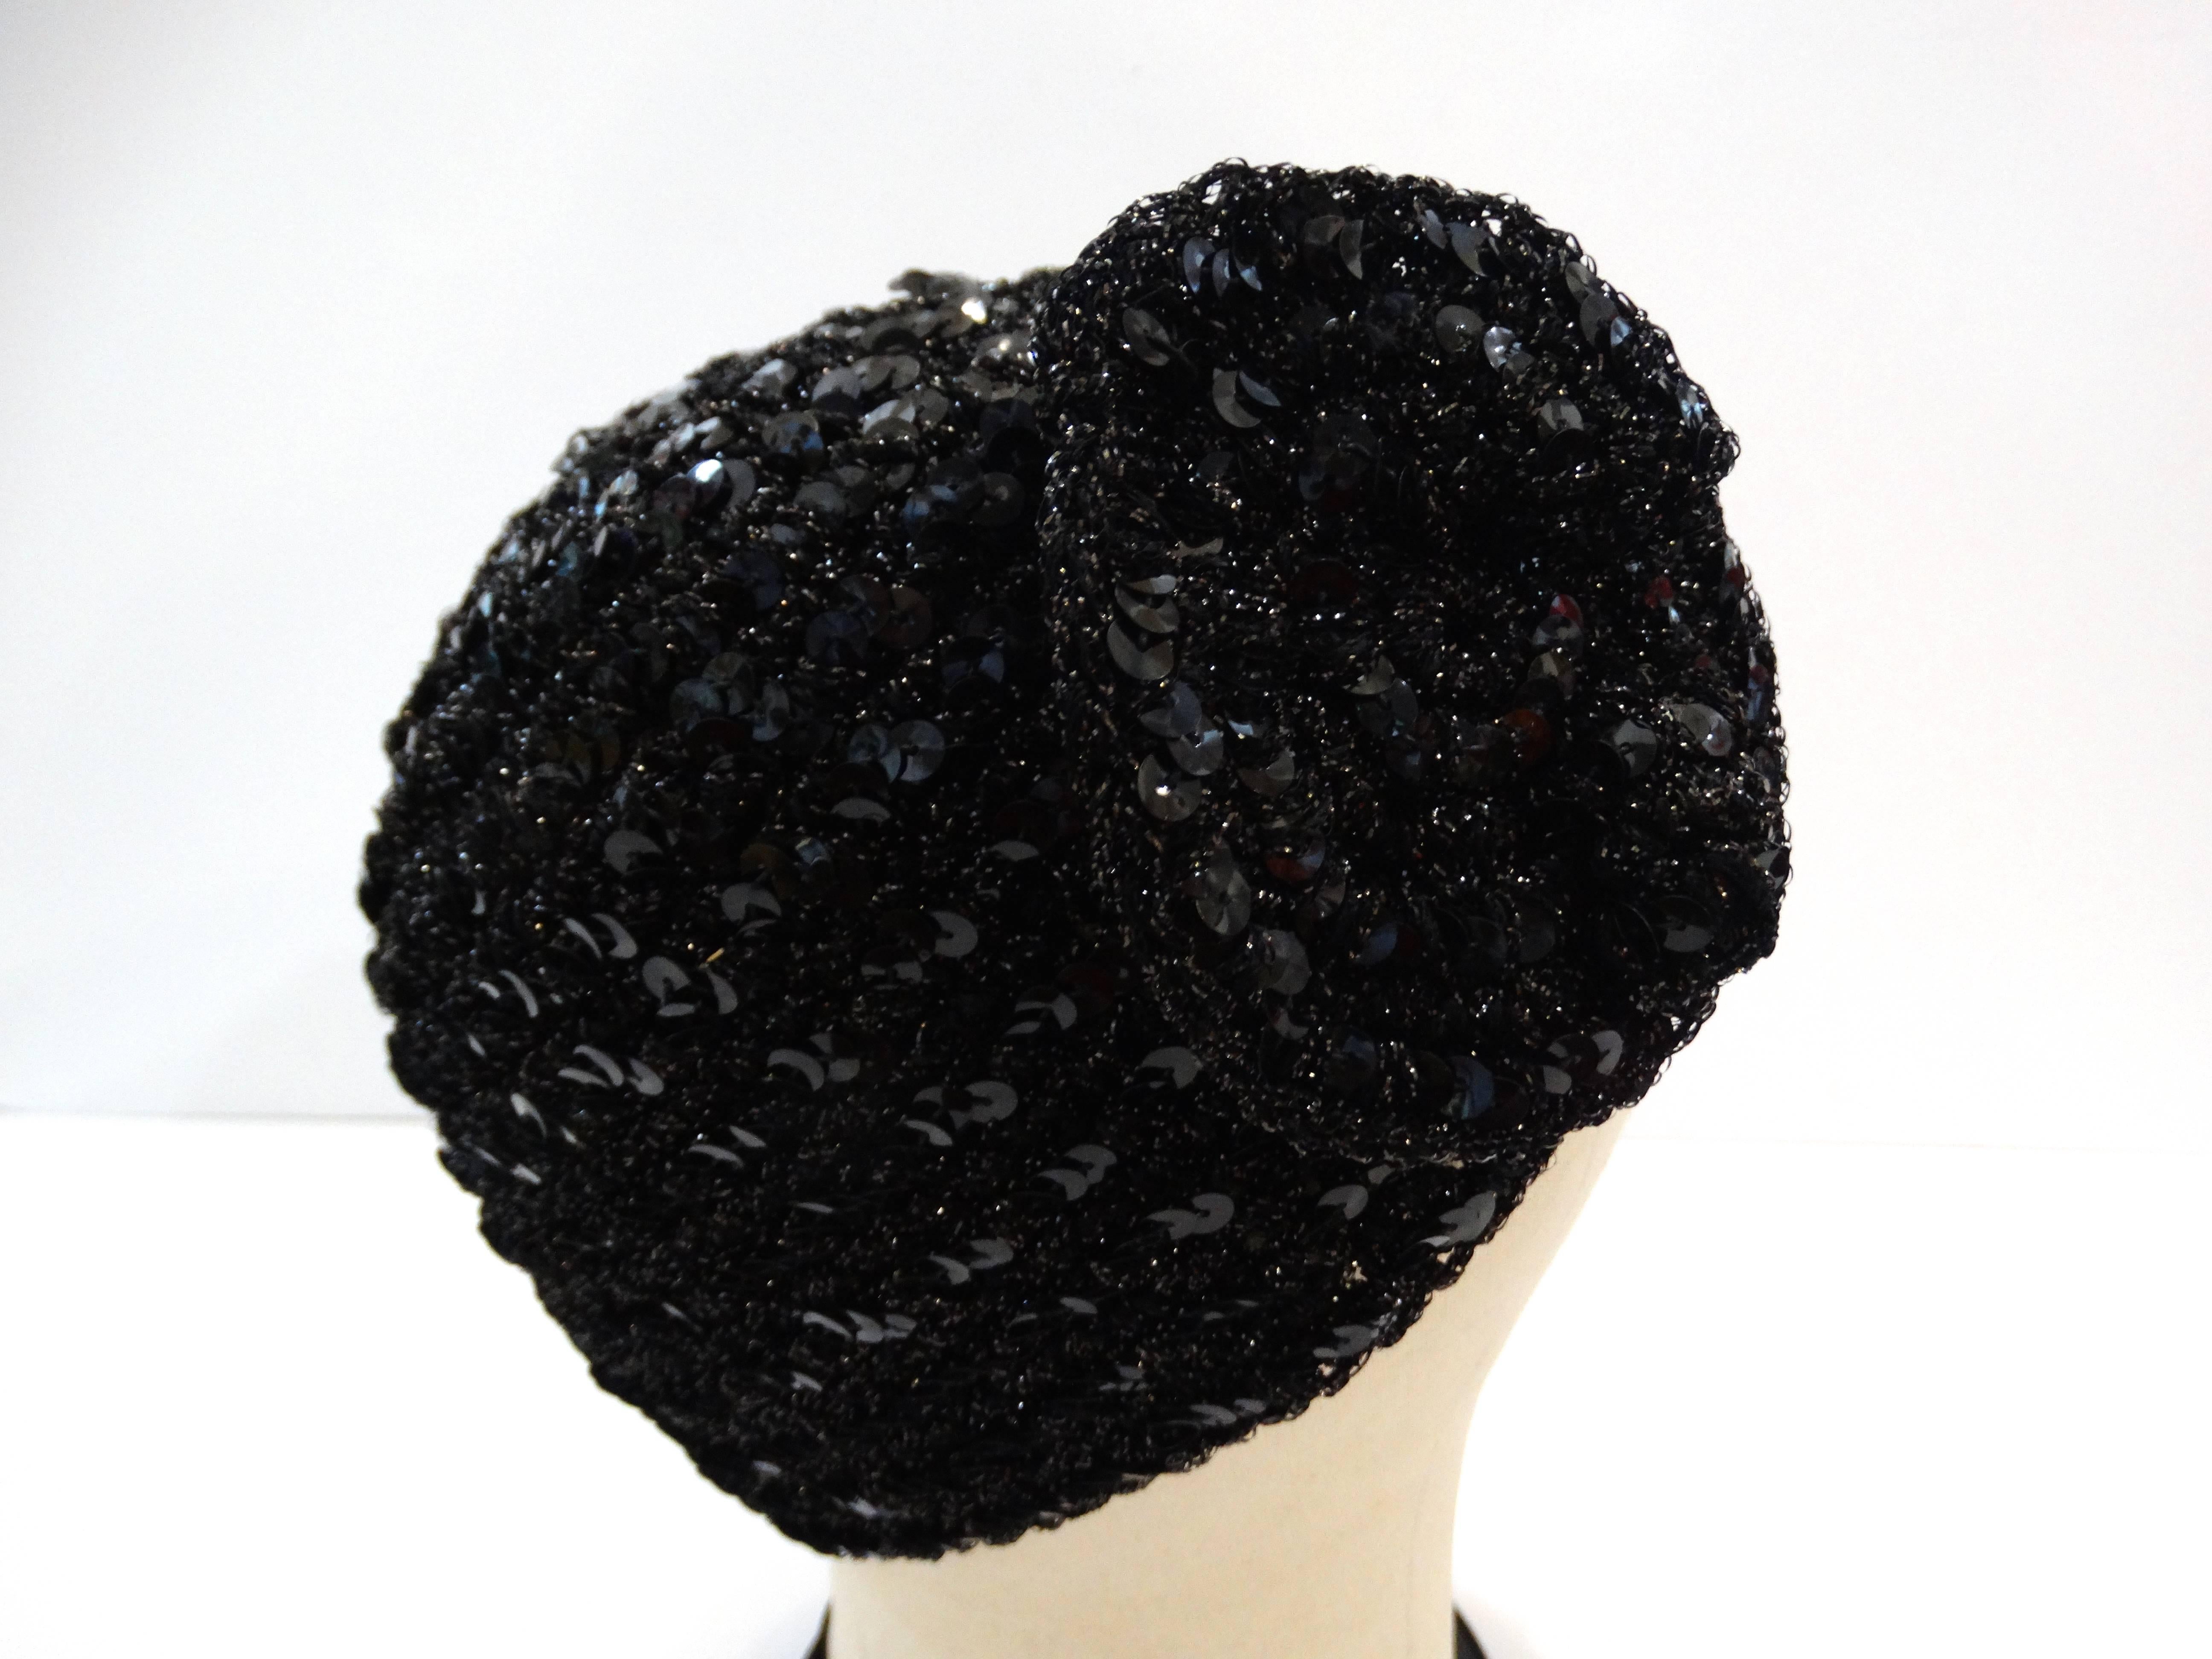 Super cute vintage Saks Fifth Avenue skullcap beanie! Black stretch knit accented with tons of sequins! Large sequined flower on the center of the hat. Sits comfortably on the back of the head, wears easily as a skullcap or a beanie. Fabric has some